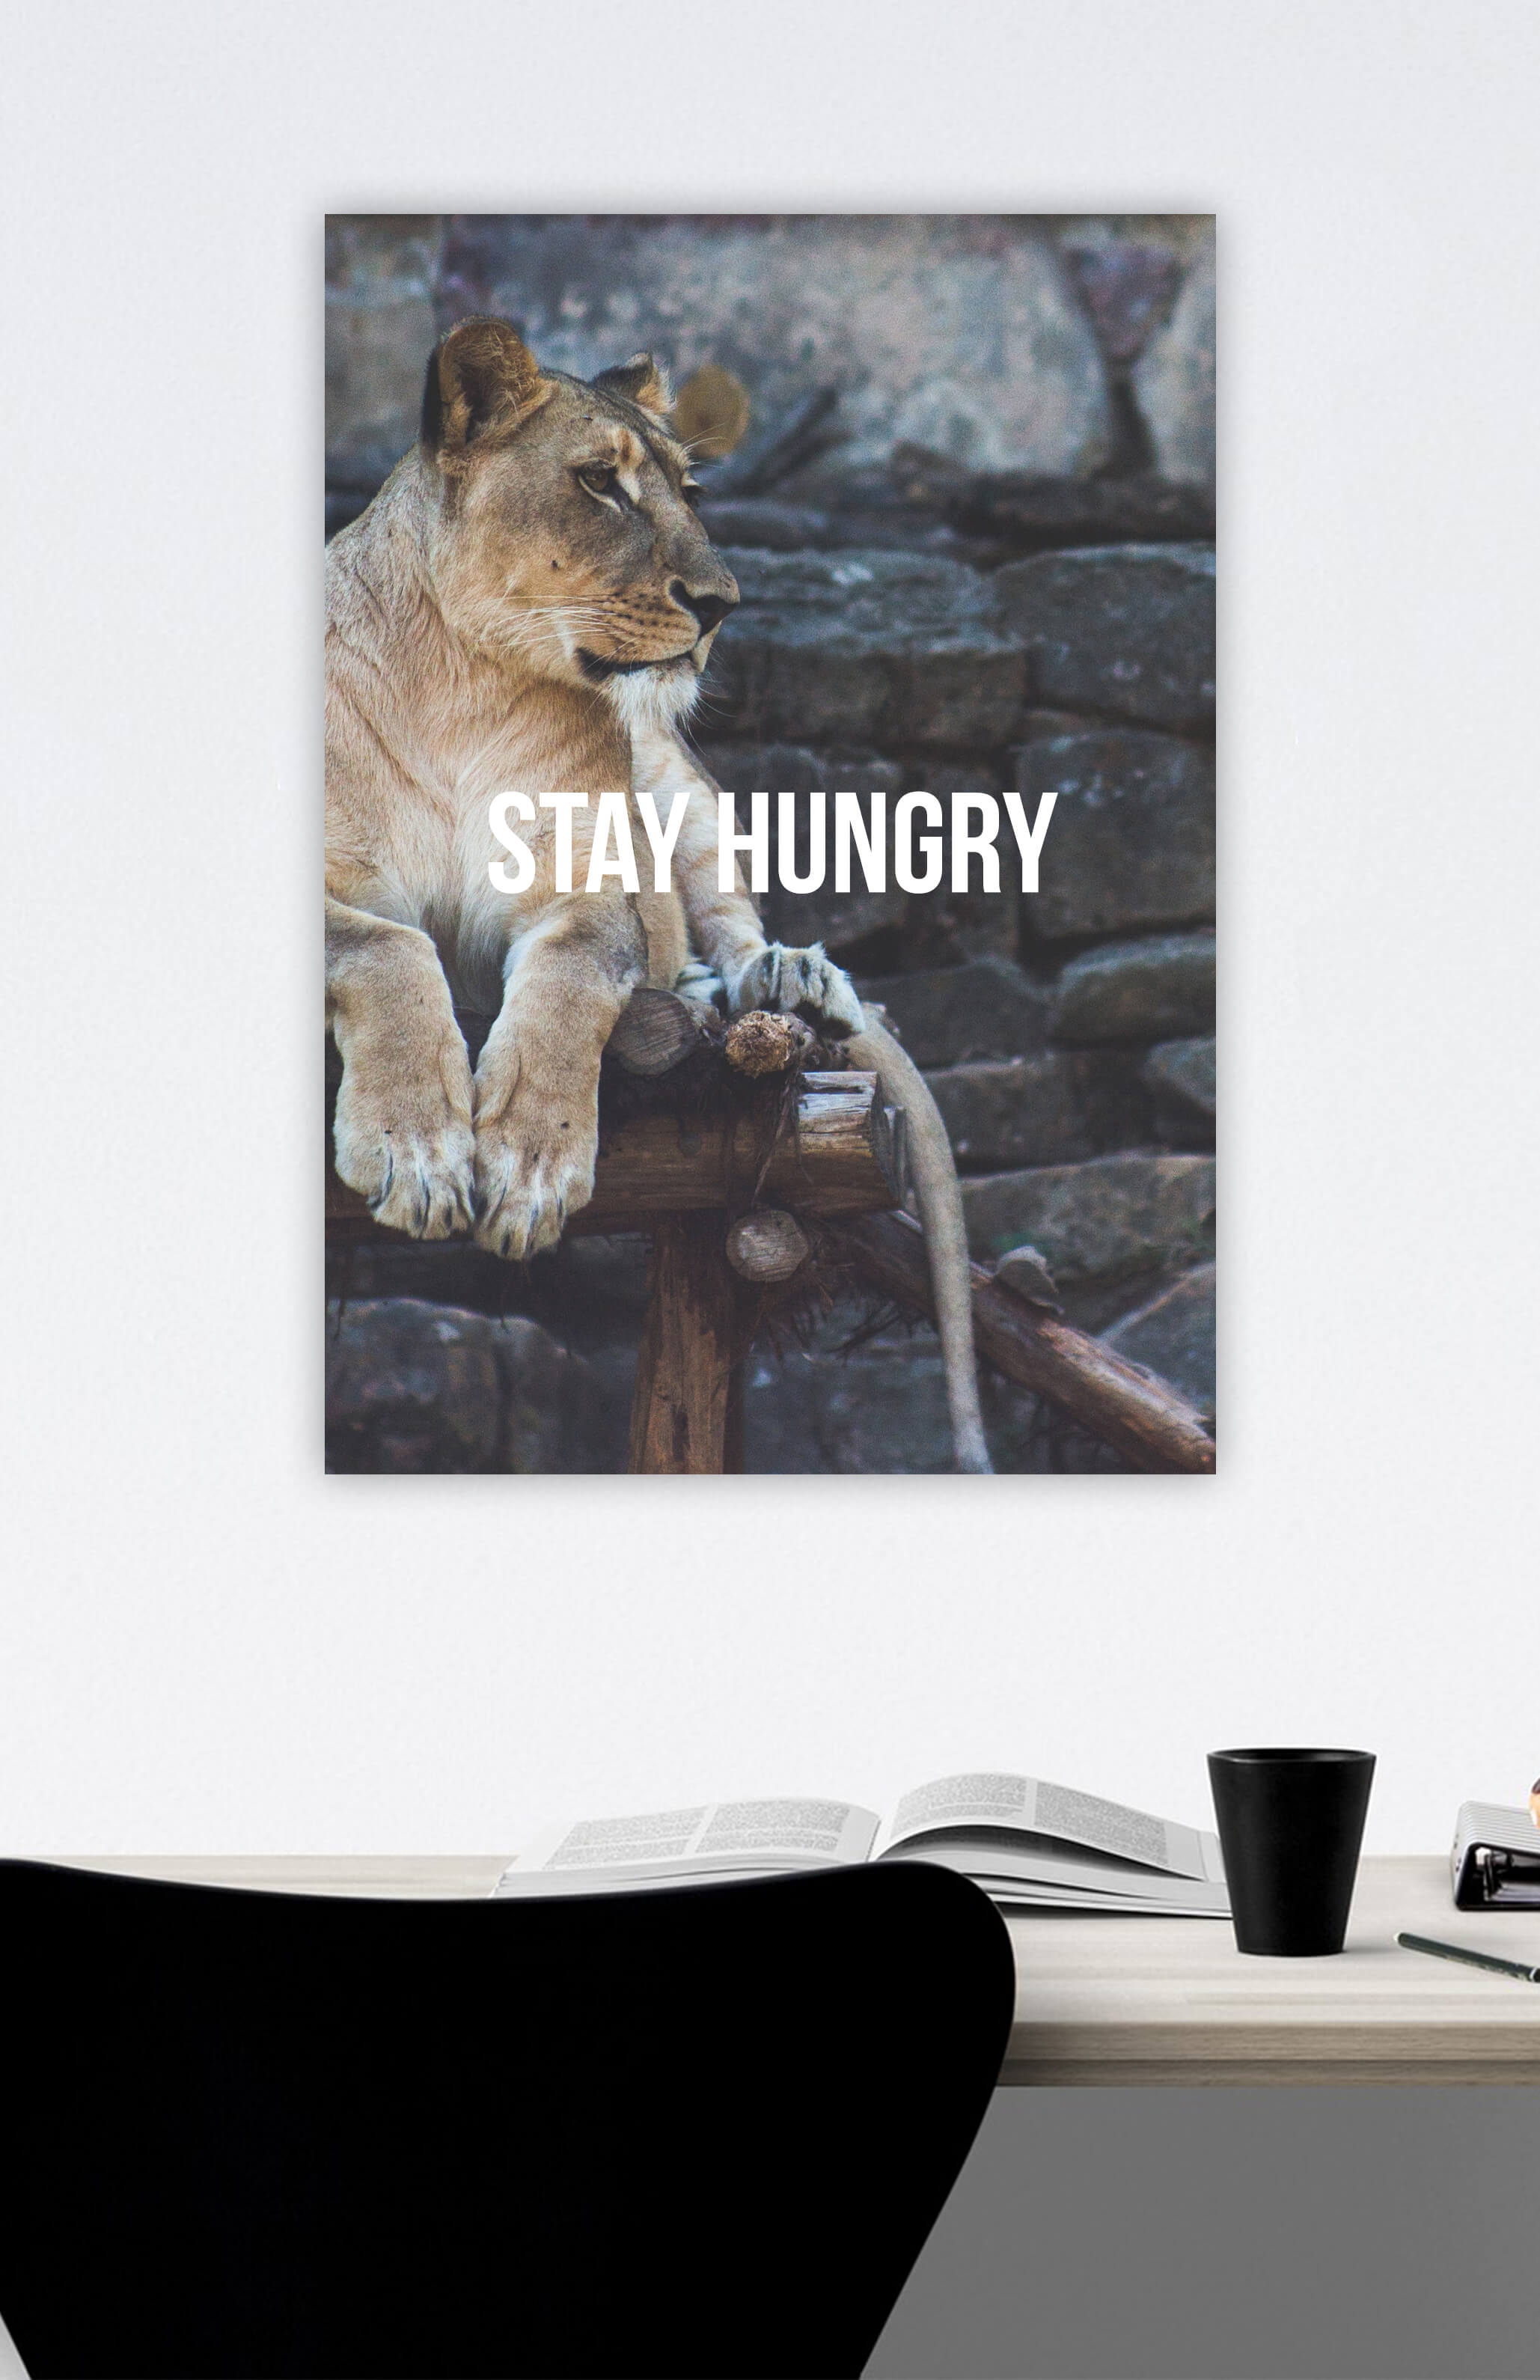 V3 Apparel womens Stay Hungry, Motivational posters, mens inspirational wall artwork and empowering poster quote designs for office, home gym, school, kitchen and living room.